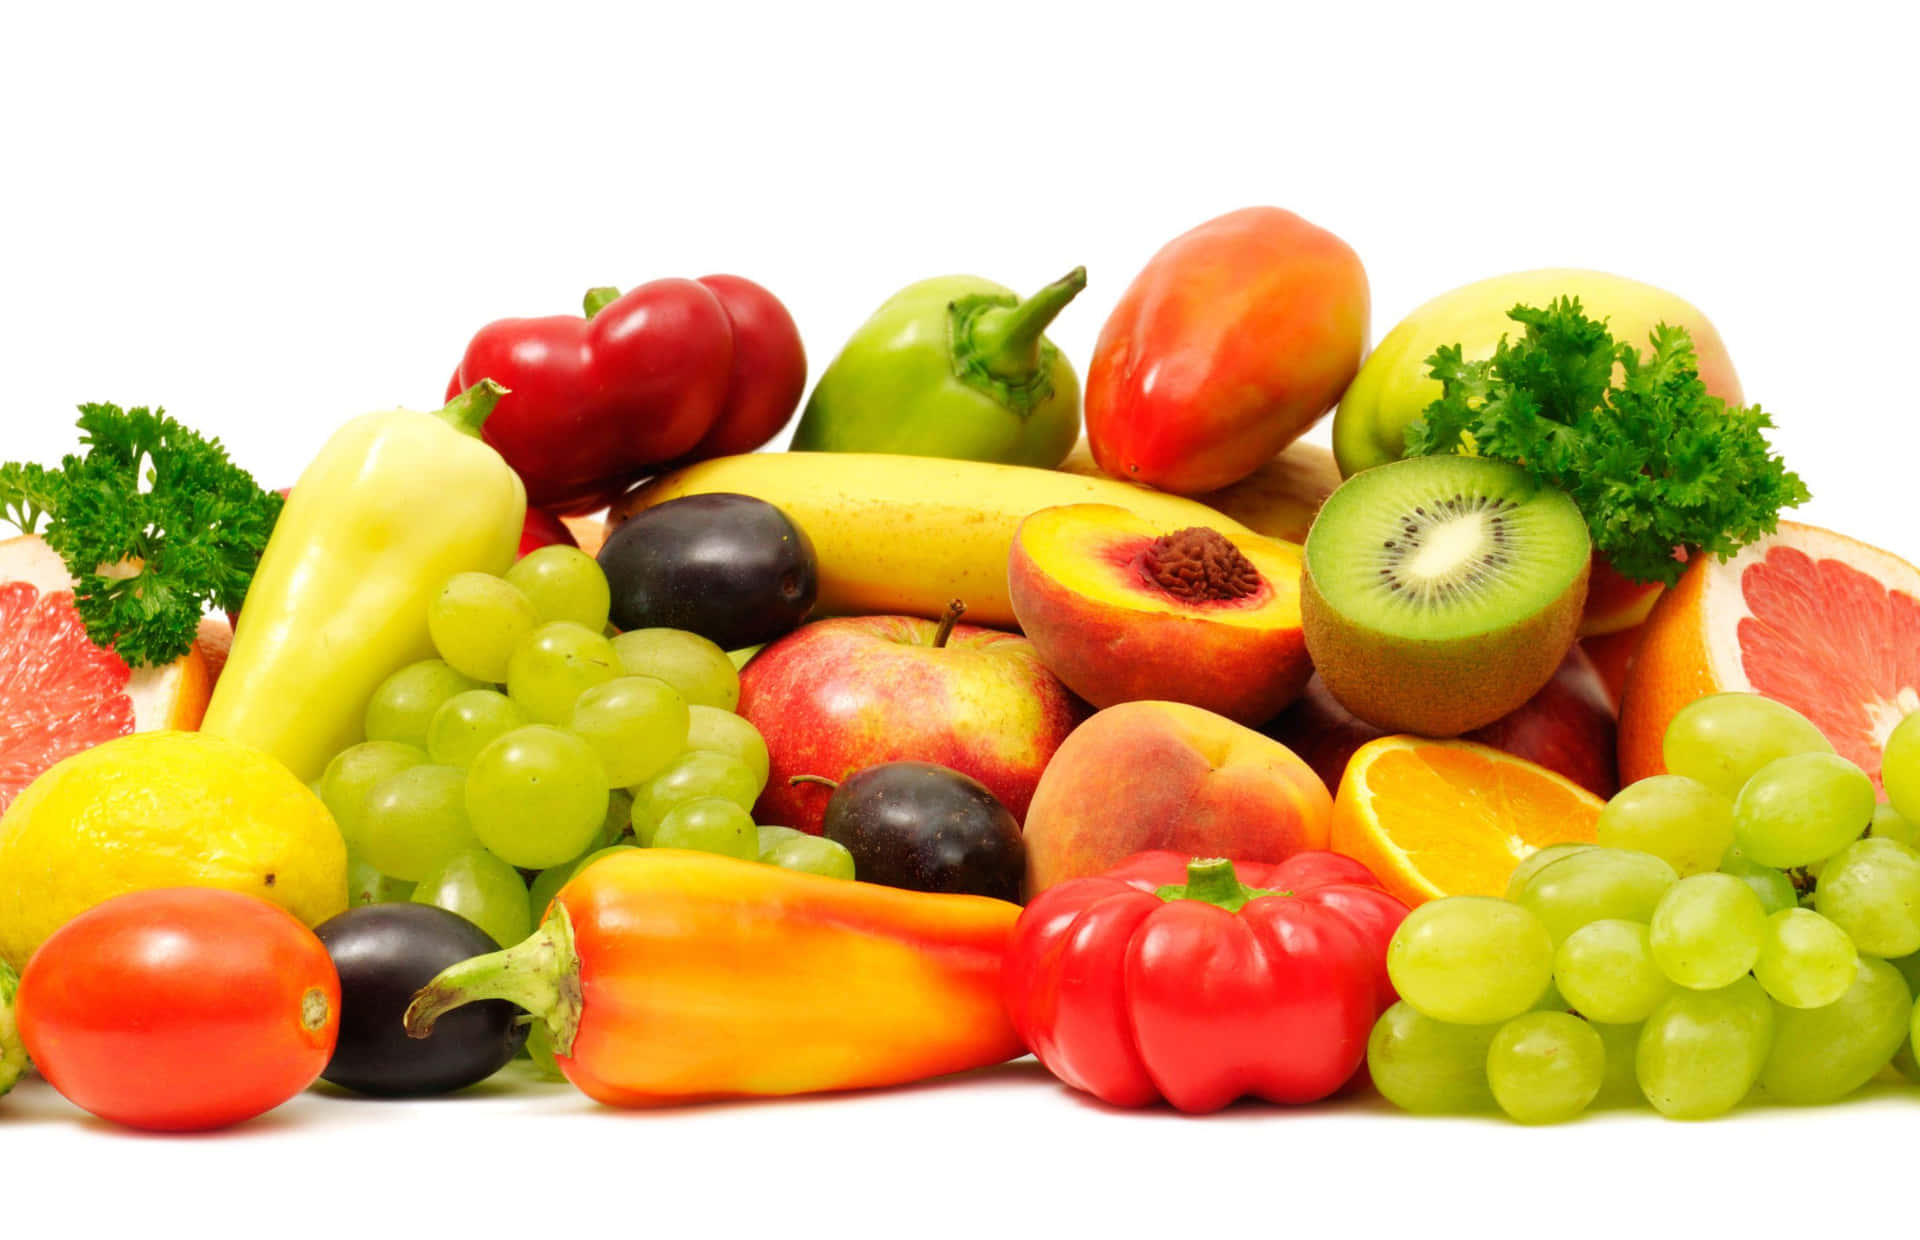 Colorful Bounty Of Fruits And Vegetables Wallpaper